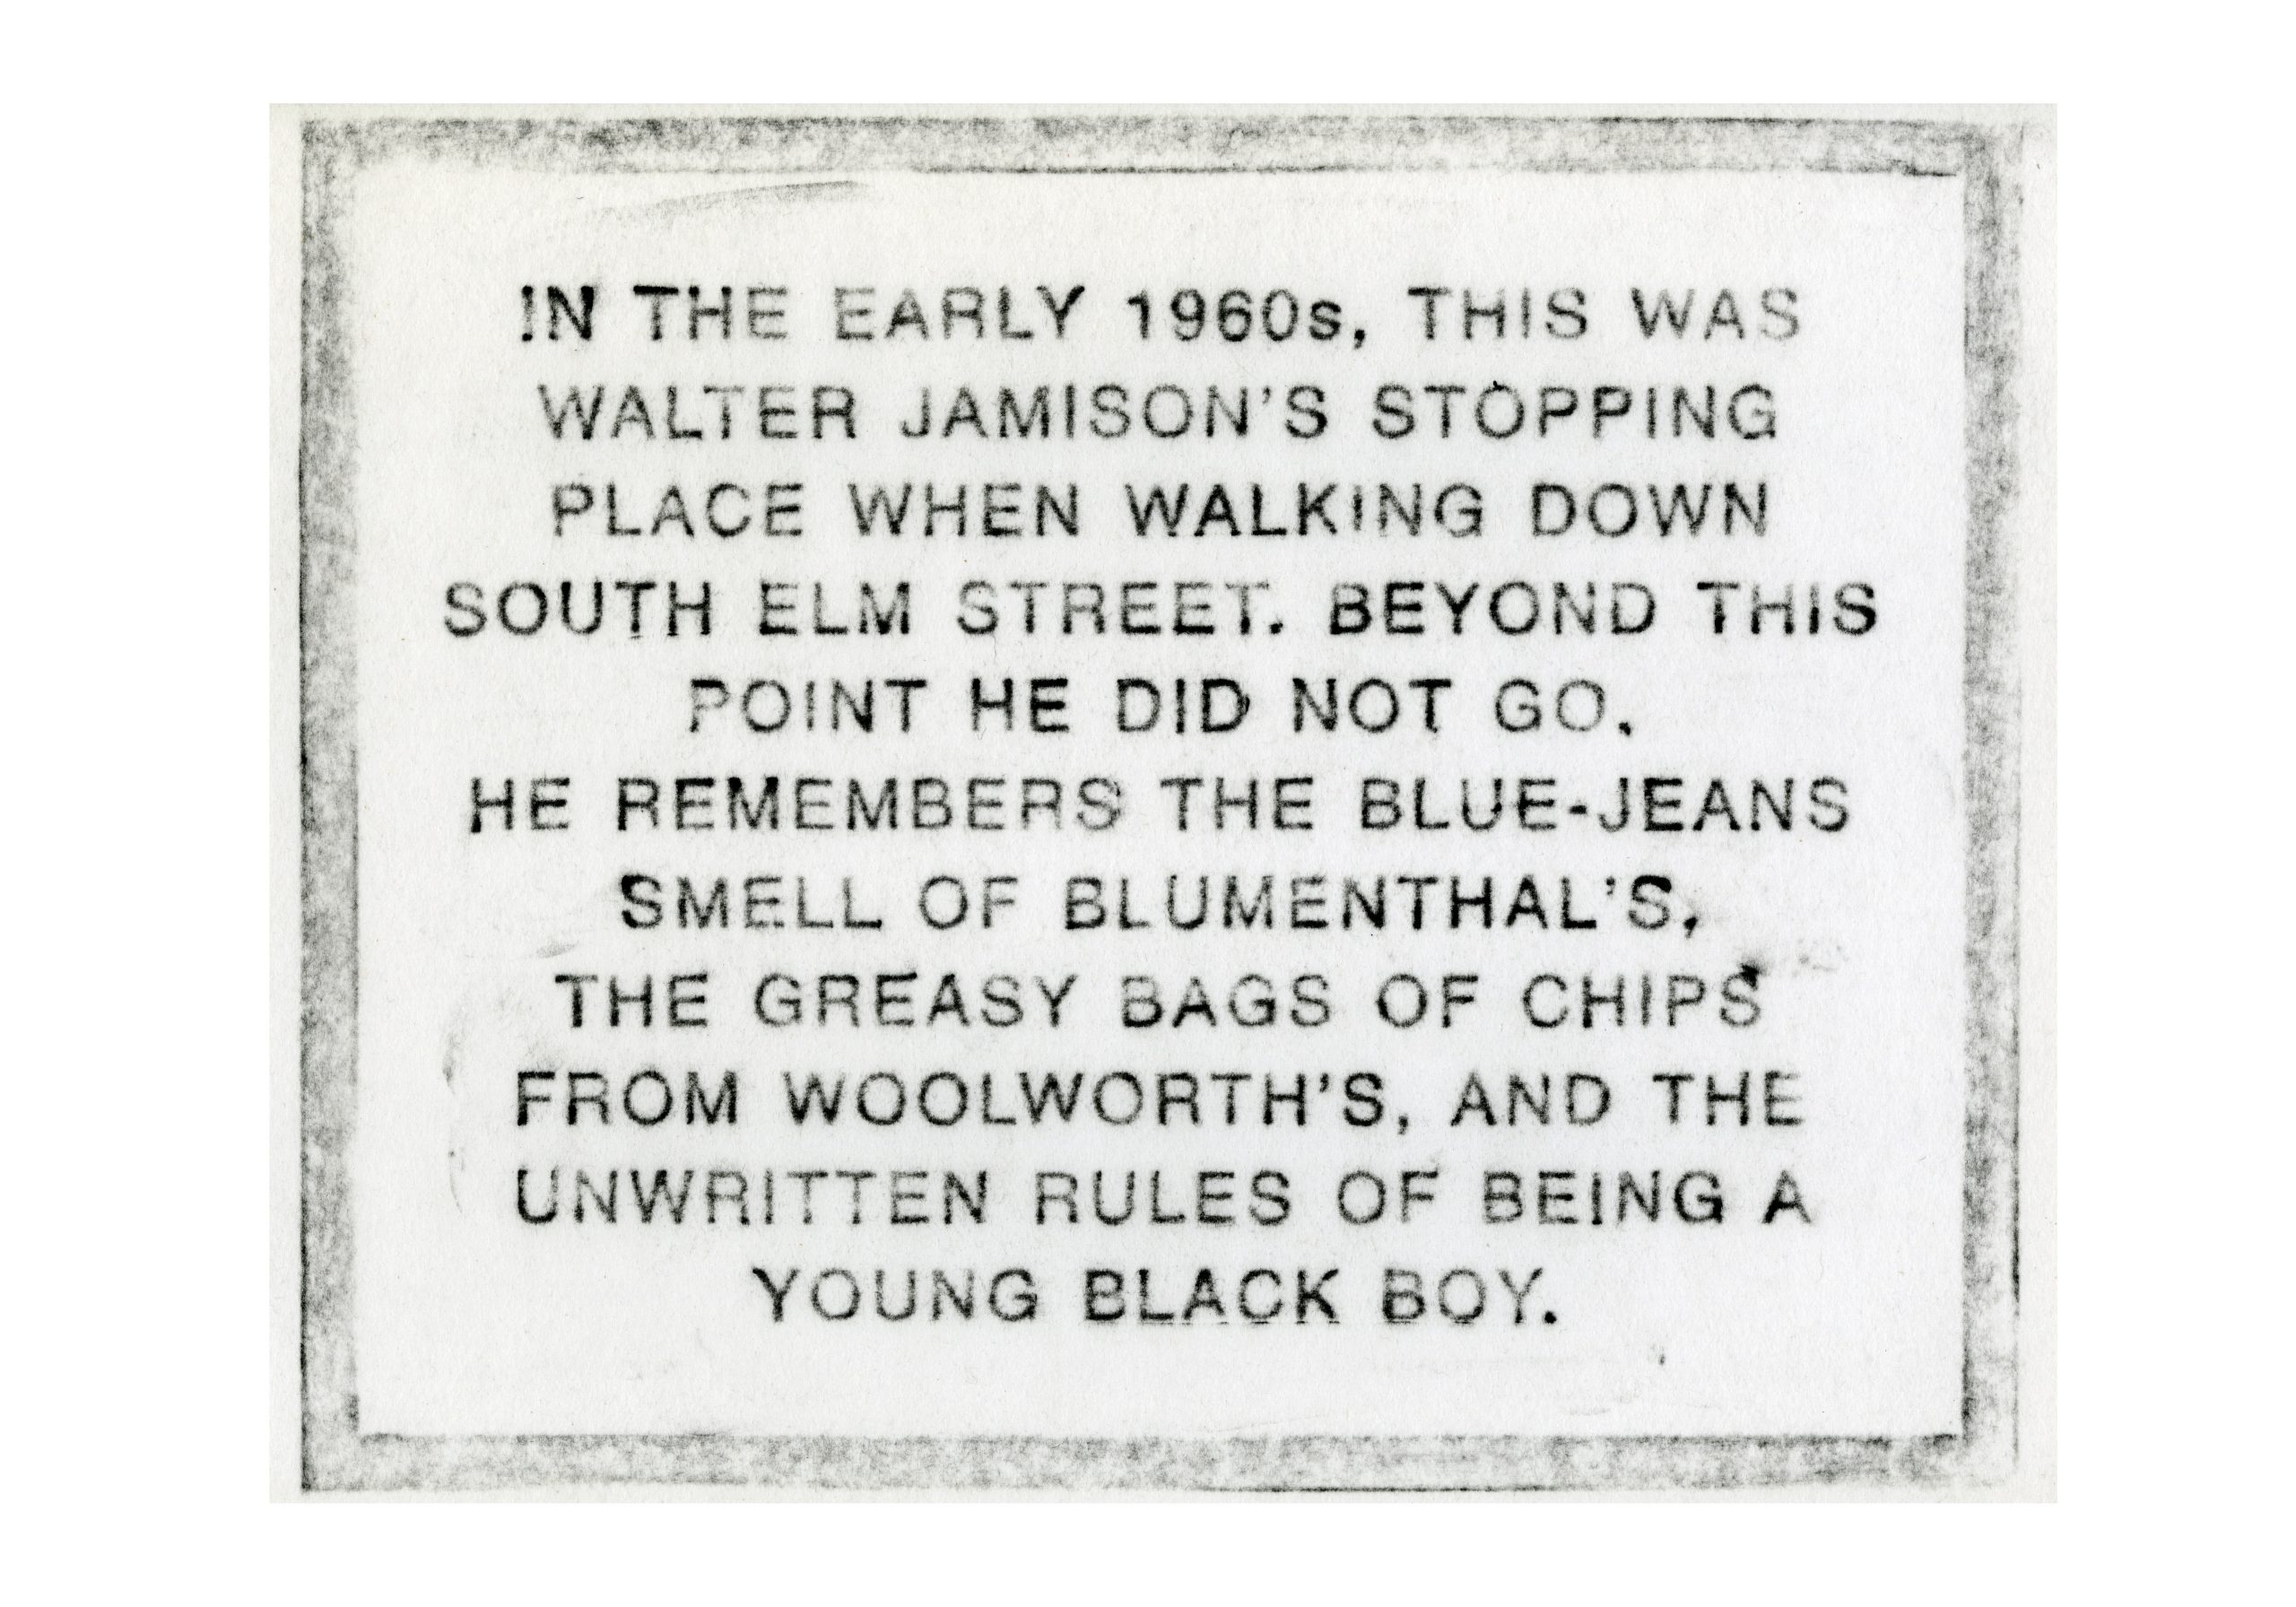 Plaque with a historical description from walter jamison about his experiences walking down south elm street in the early 1960s.